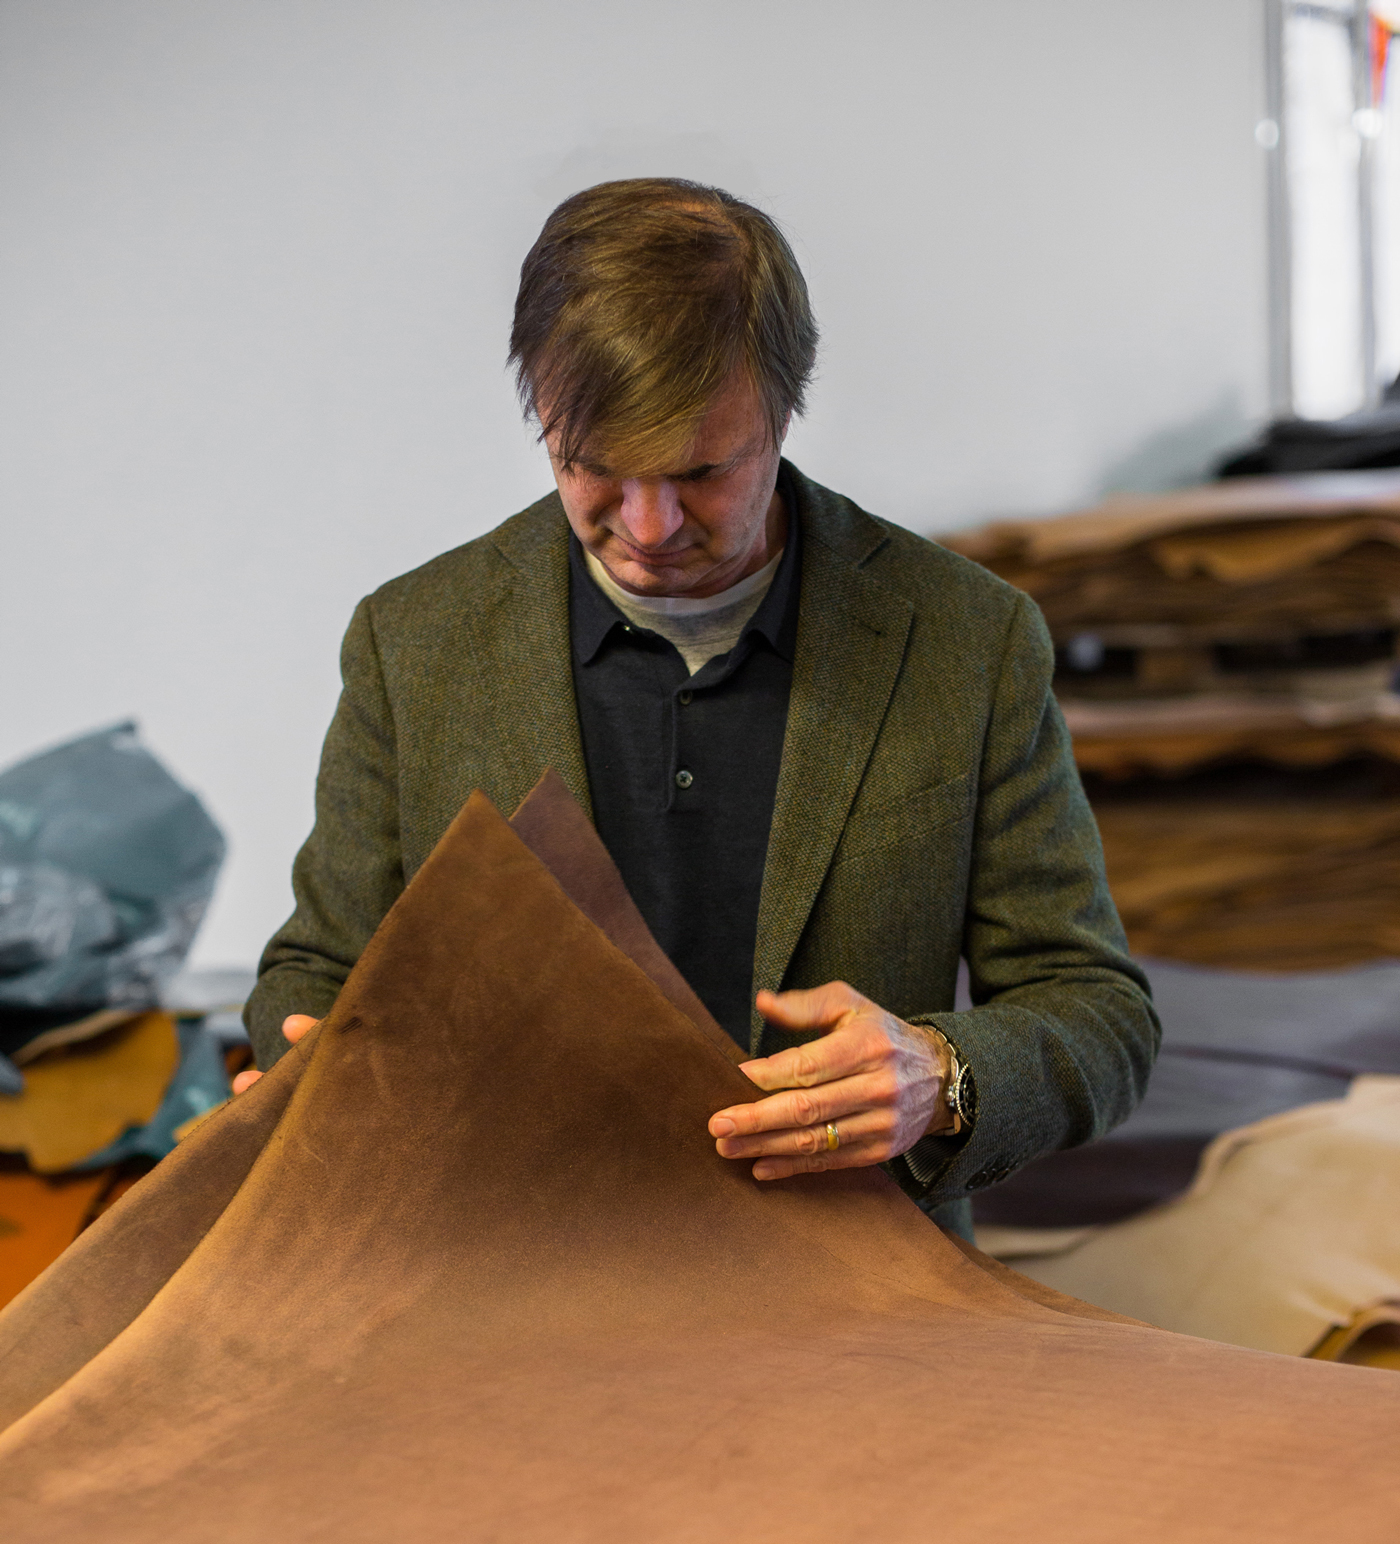 Christopher Bosca inspects leather